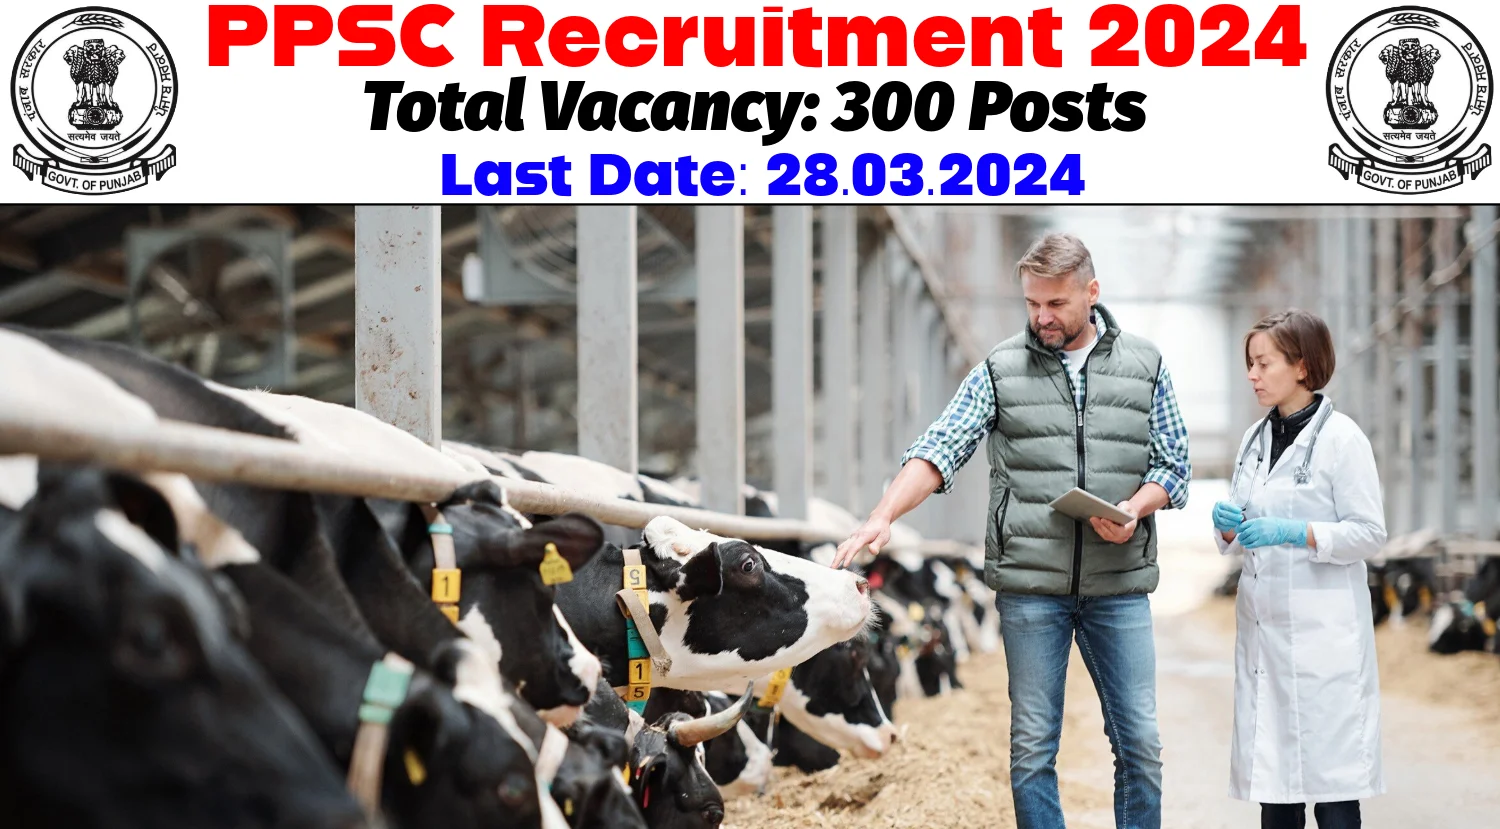 PPSC Veterinary Officer Recruitment 2024 for 300 Vacancies